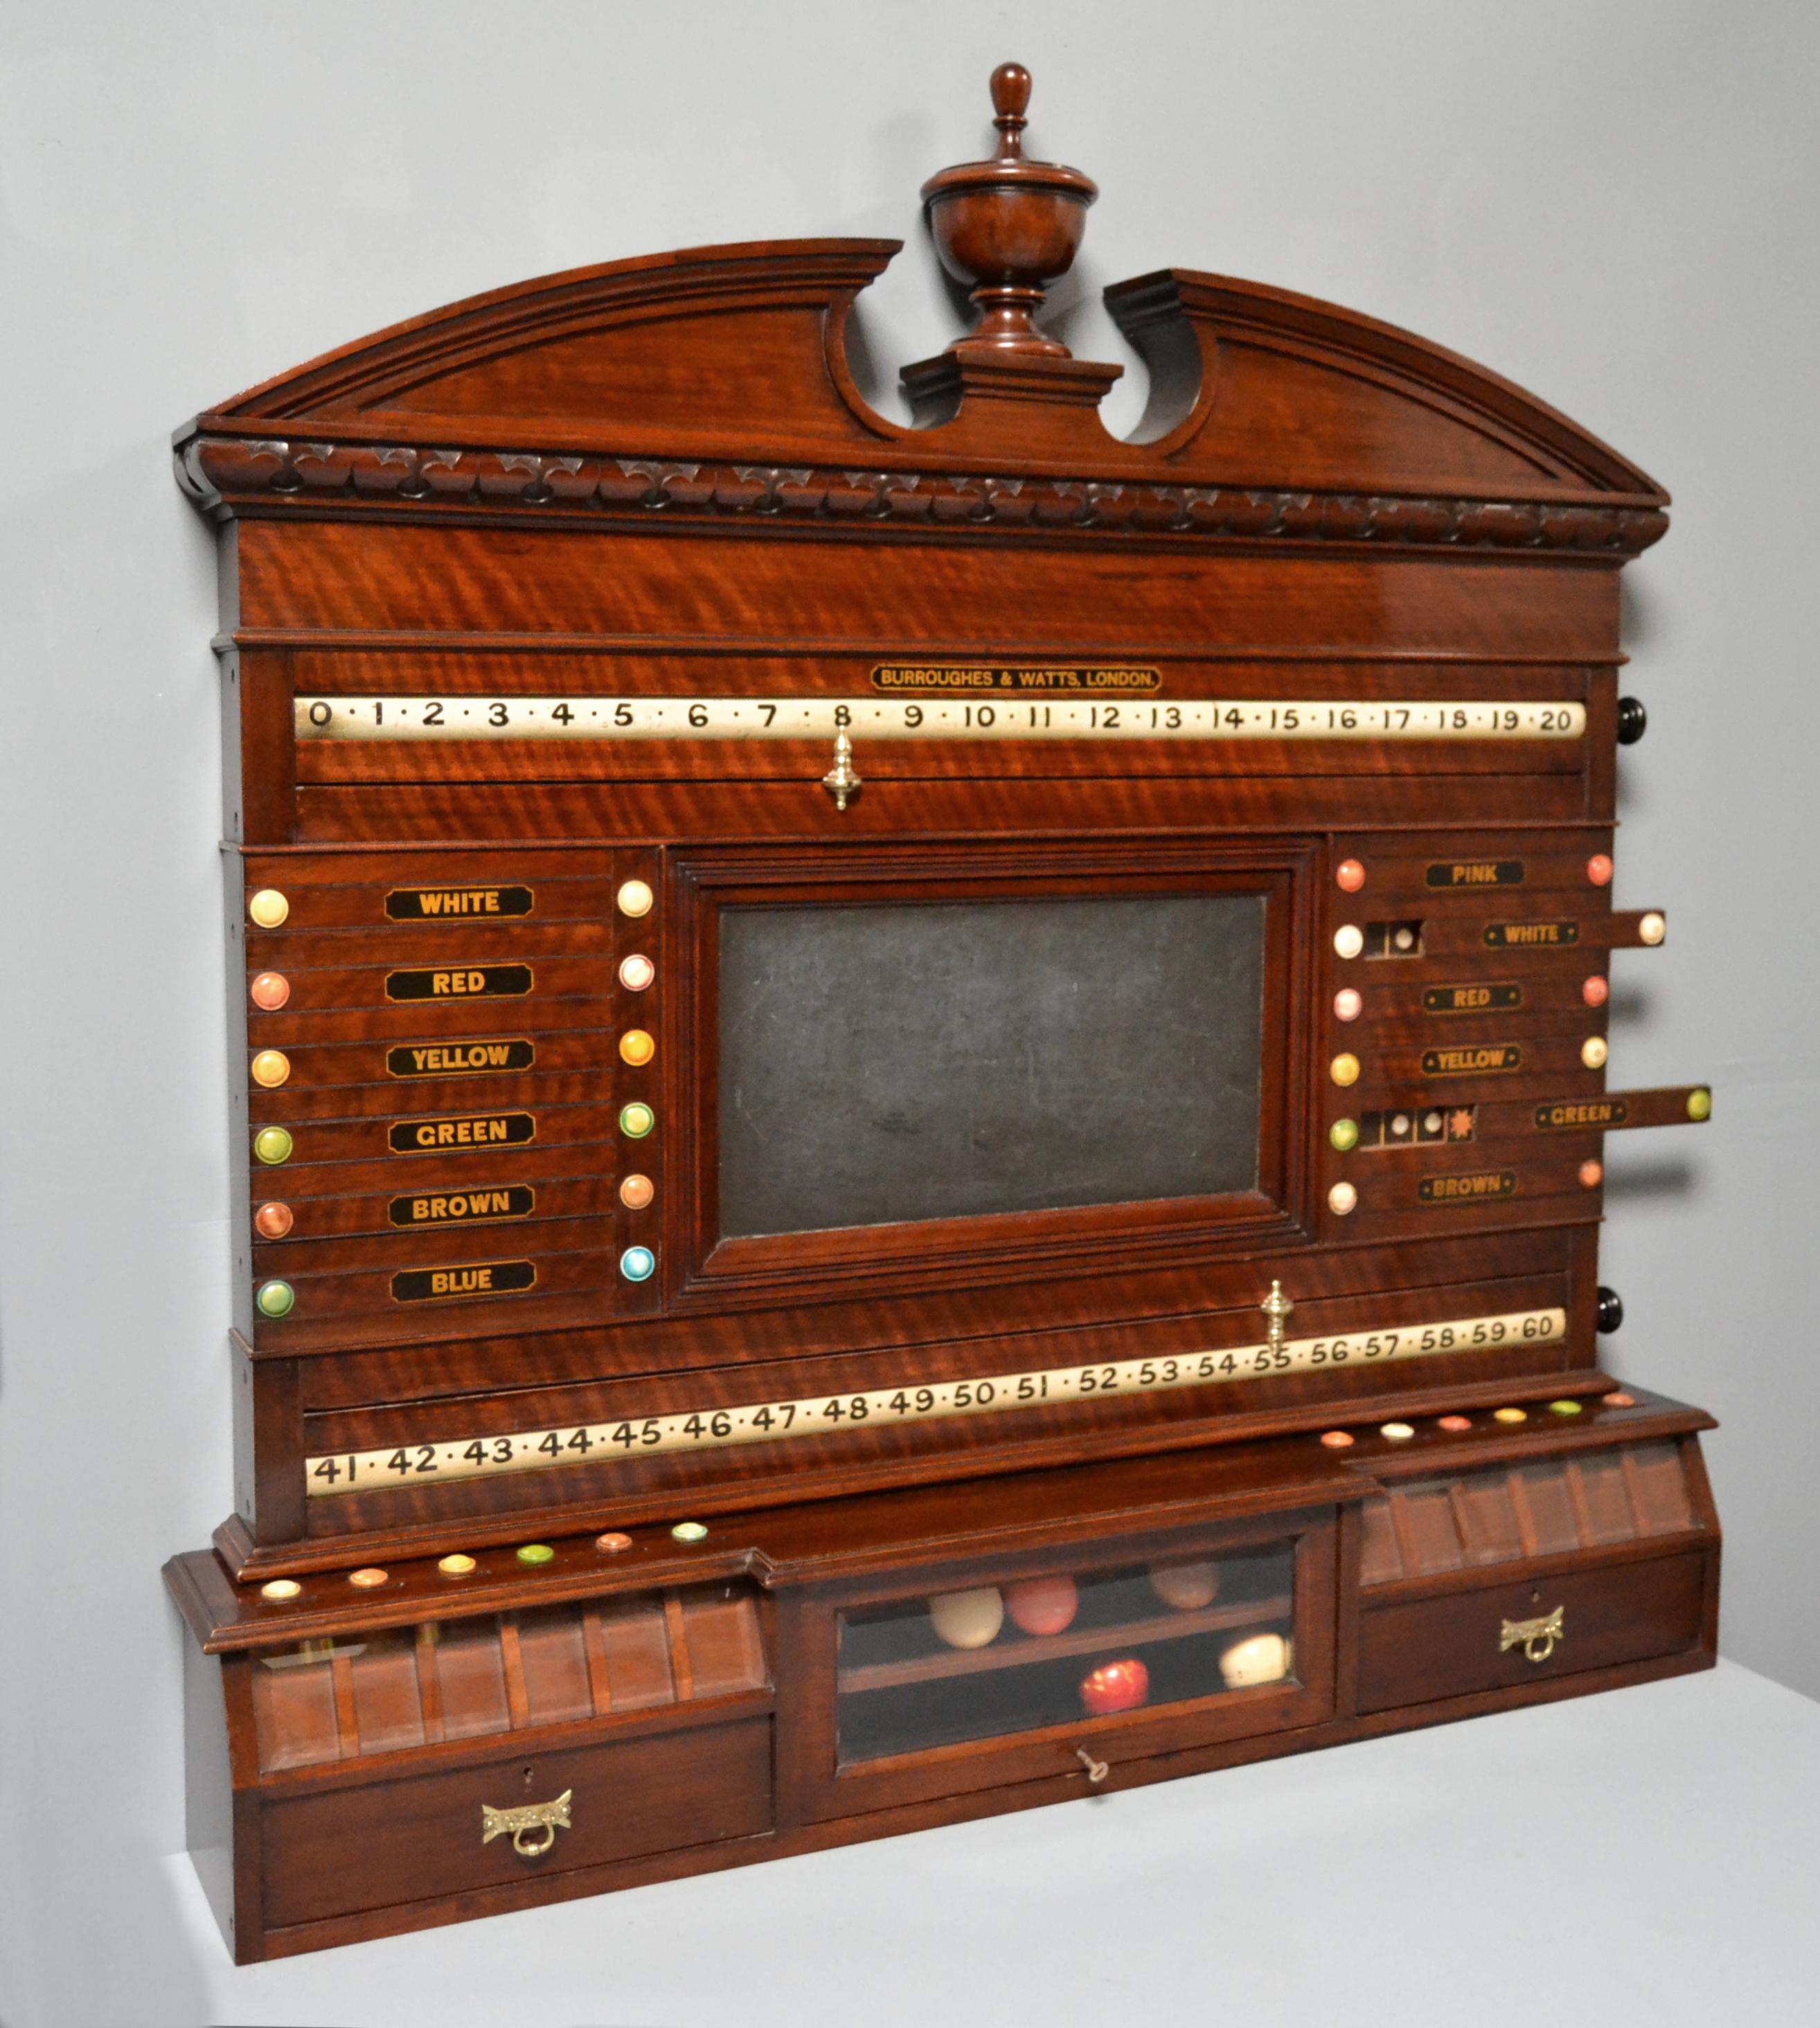 This beautiful wall-mounted Billiard , Snooker or pool mahogany scoring cabinet was made circa 1880, it features a decorative arched carved pediment, a central finial, a central reversible mirror panel flanked by Life Pool sliders and revolving